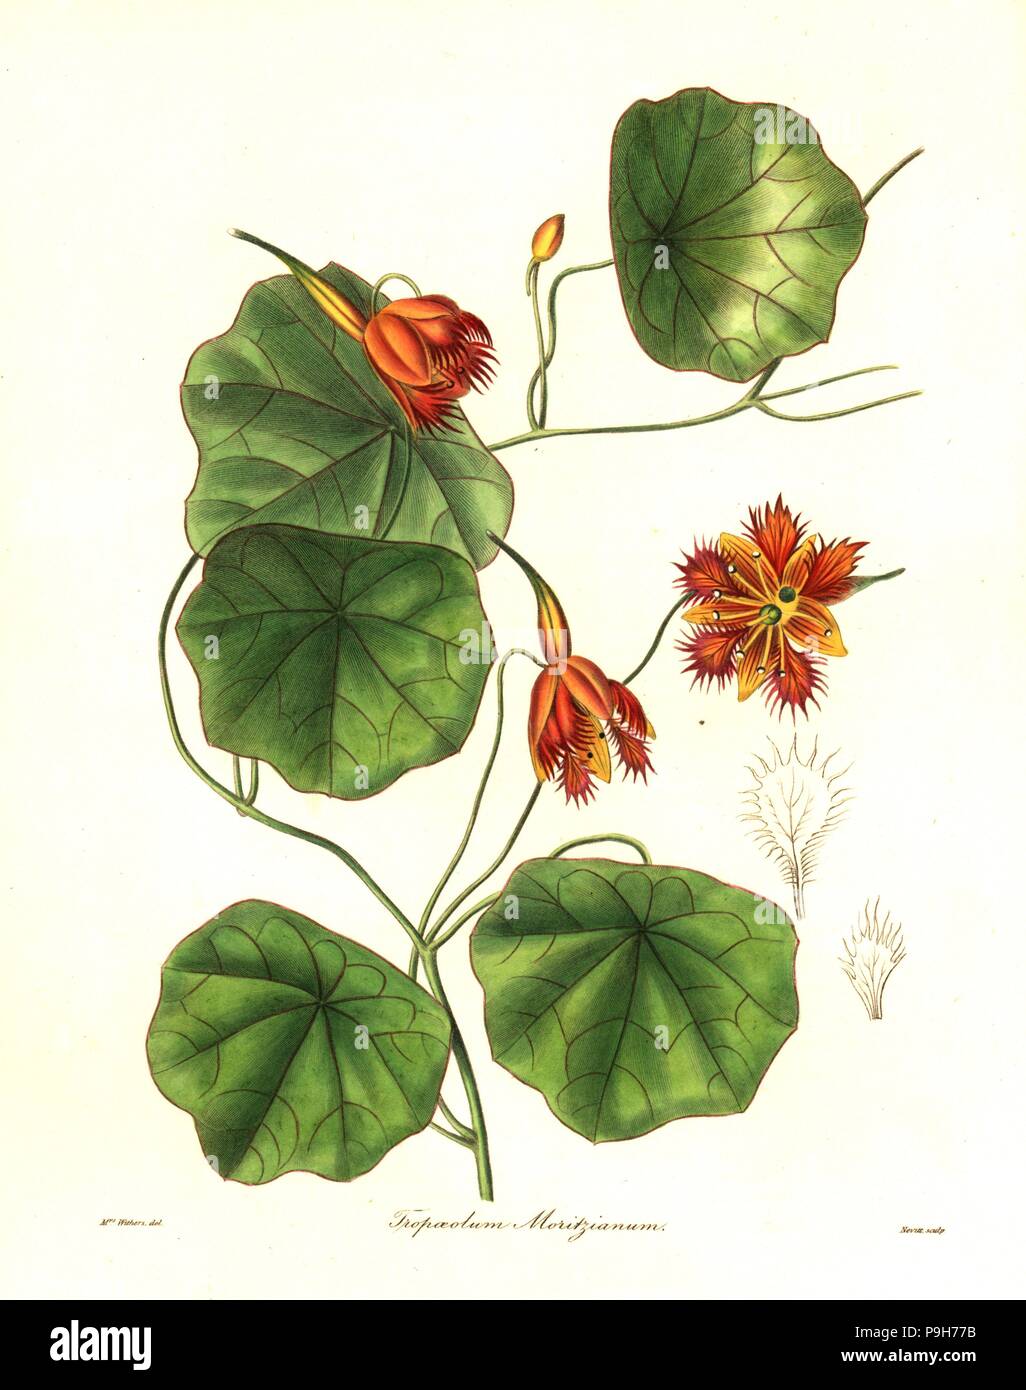 Moritz' Indian cress, Tropaeolum moritzianum. Handcoloured copperplate engraving by S. Nevitt after a botanical illustration by Mrs Augusta Withers from Benjamin Maund and the Rev. John Stevens Henslow's The Botanist, London, 1836. Stock Photo